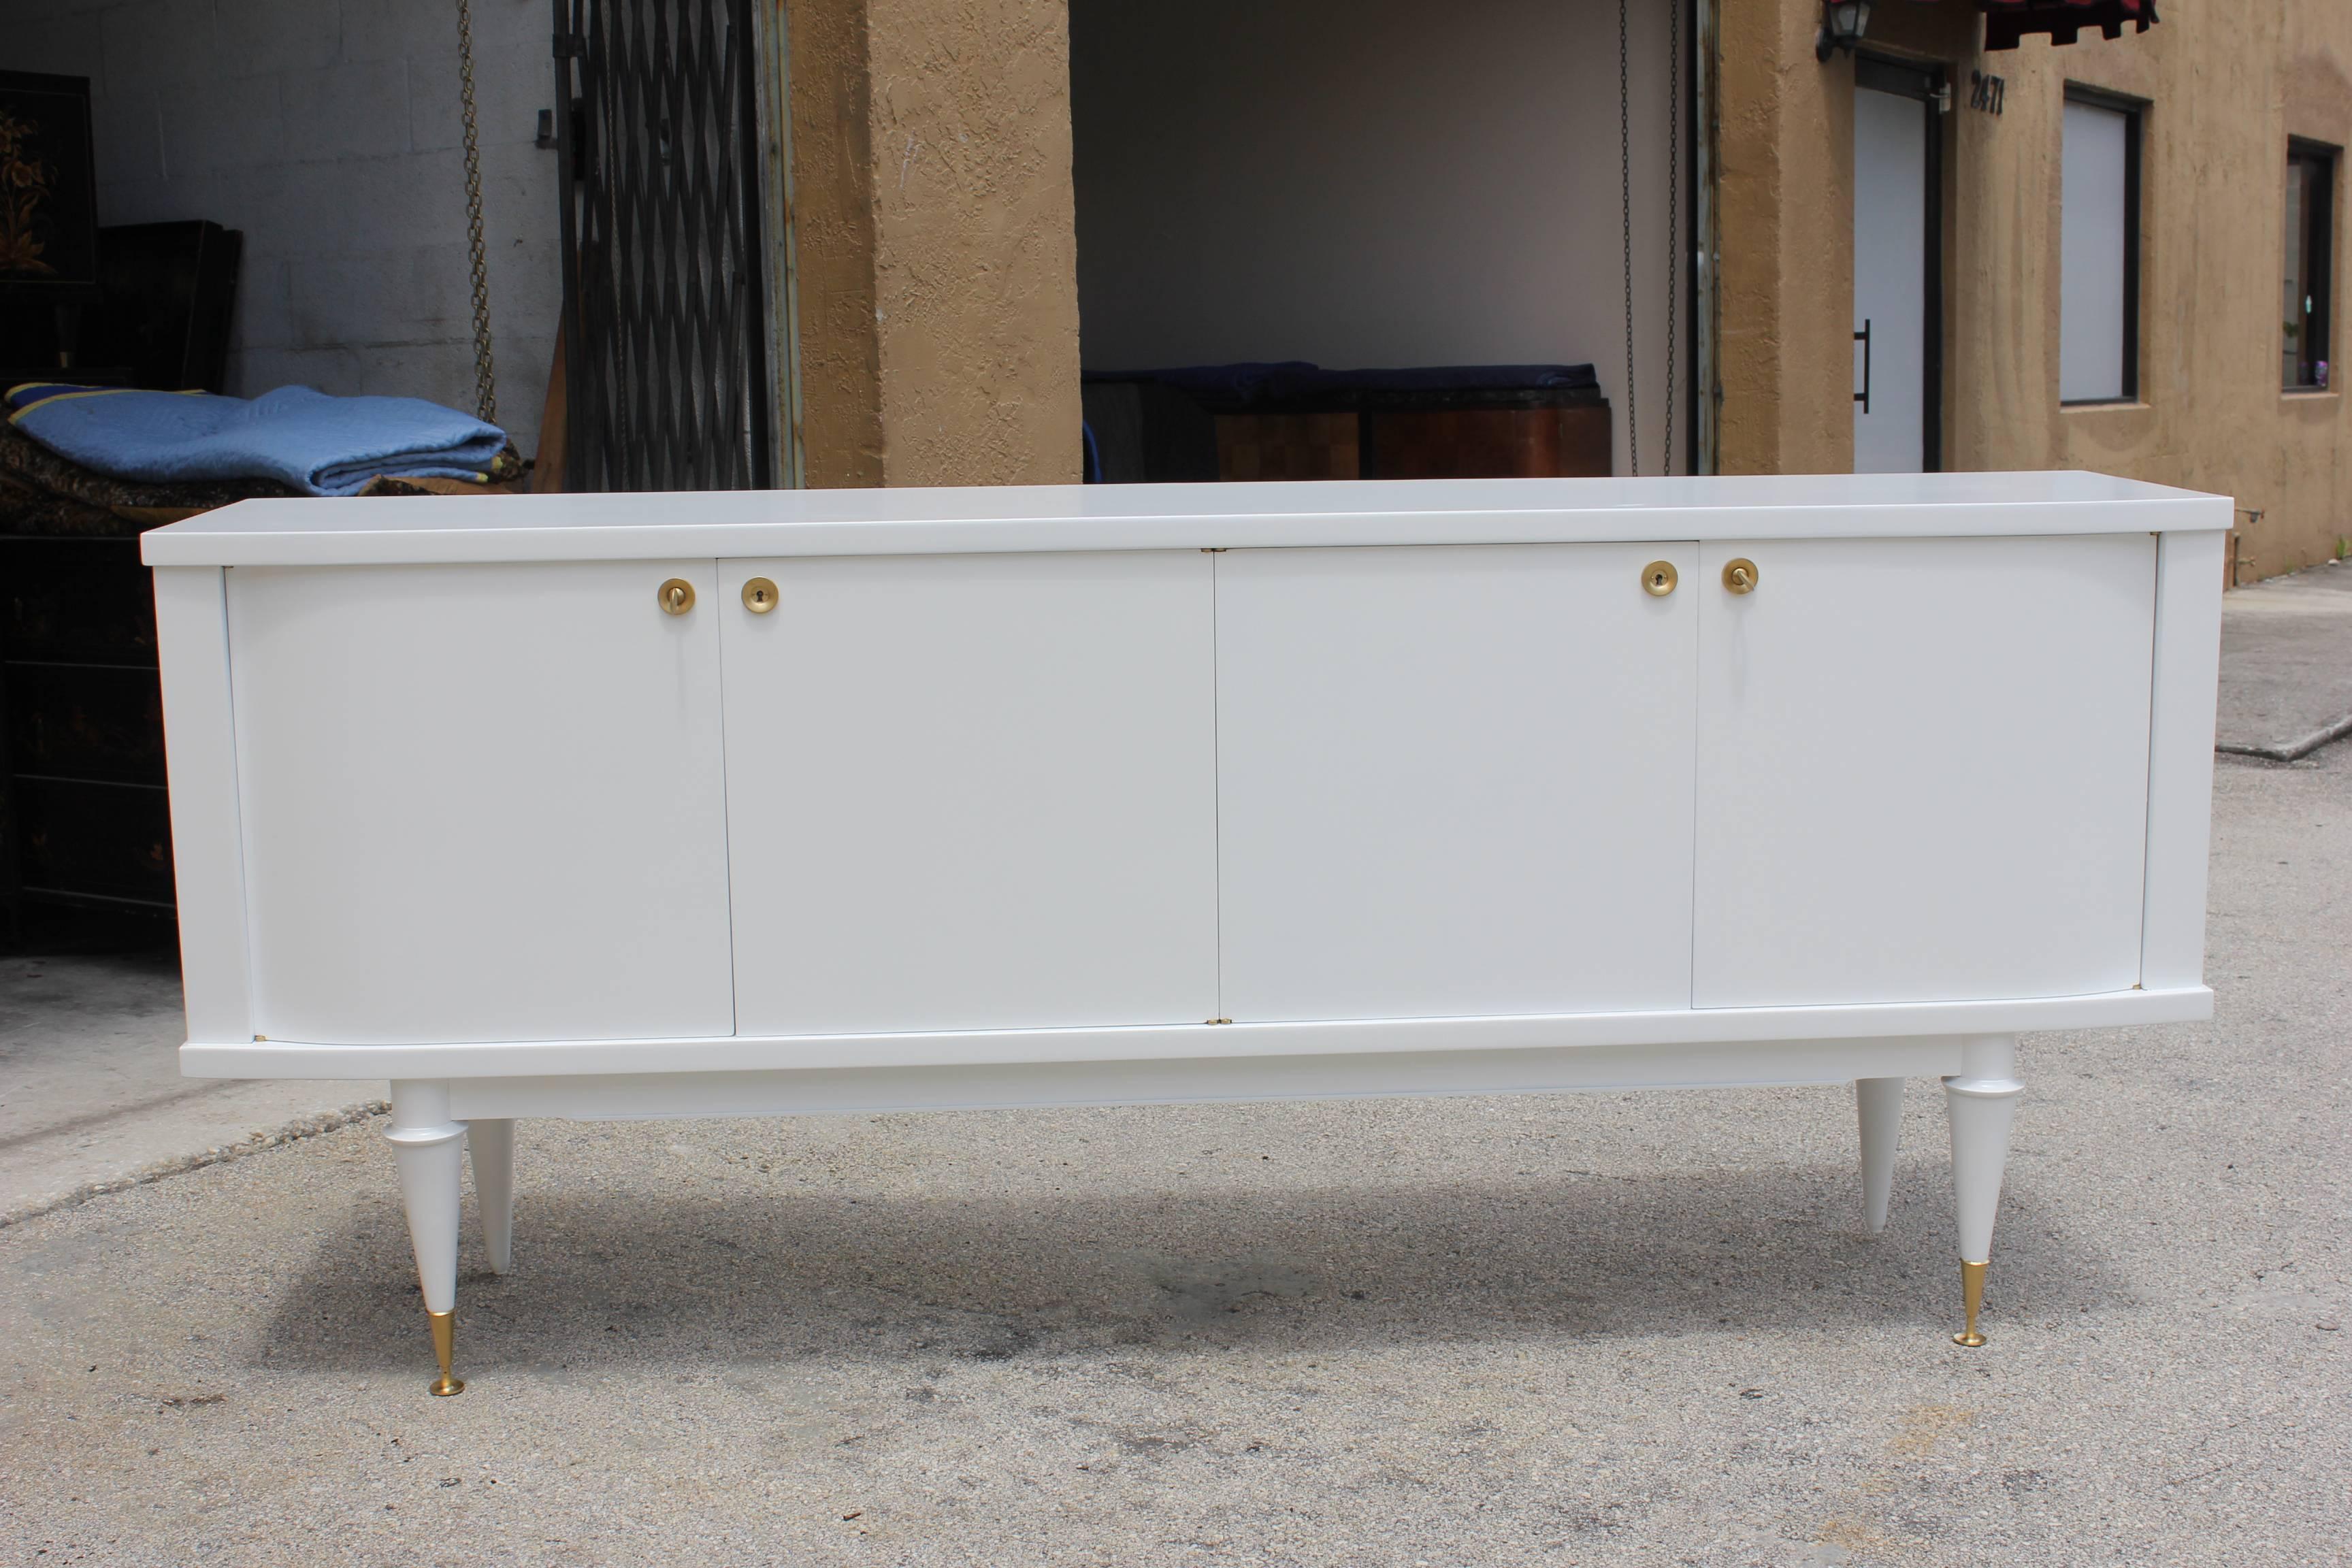 A French Art deco / art  Modern snow white lacquered sideboard, circa 1940s. Freshly lacquered in stunning white inside and out. Curved door detail on the left and right doors.